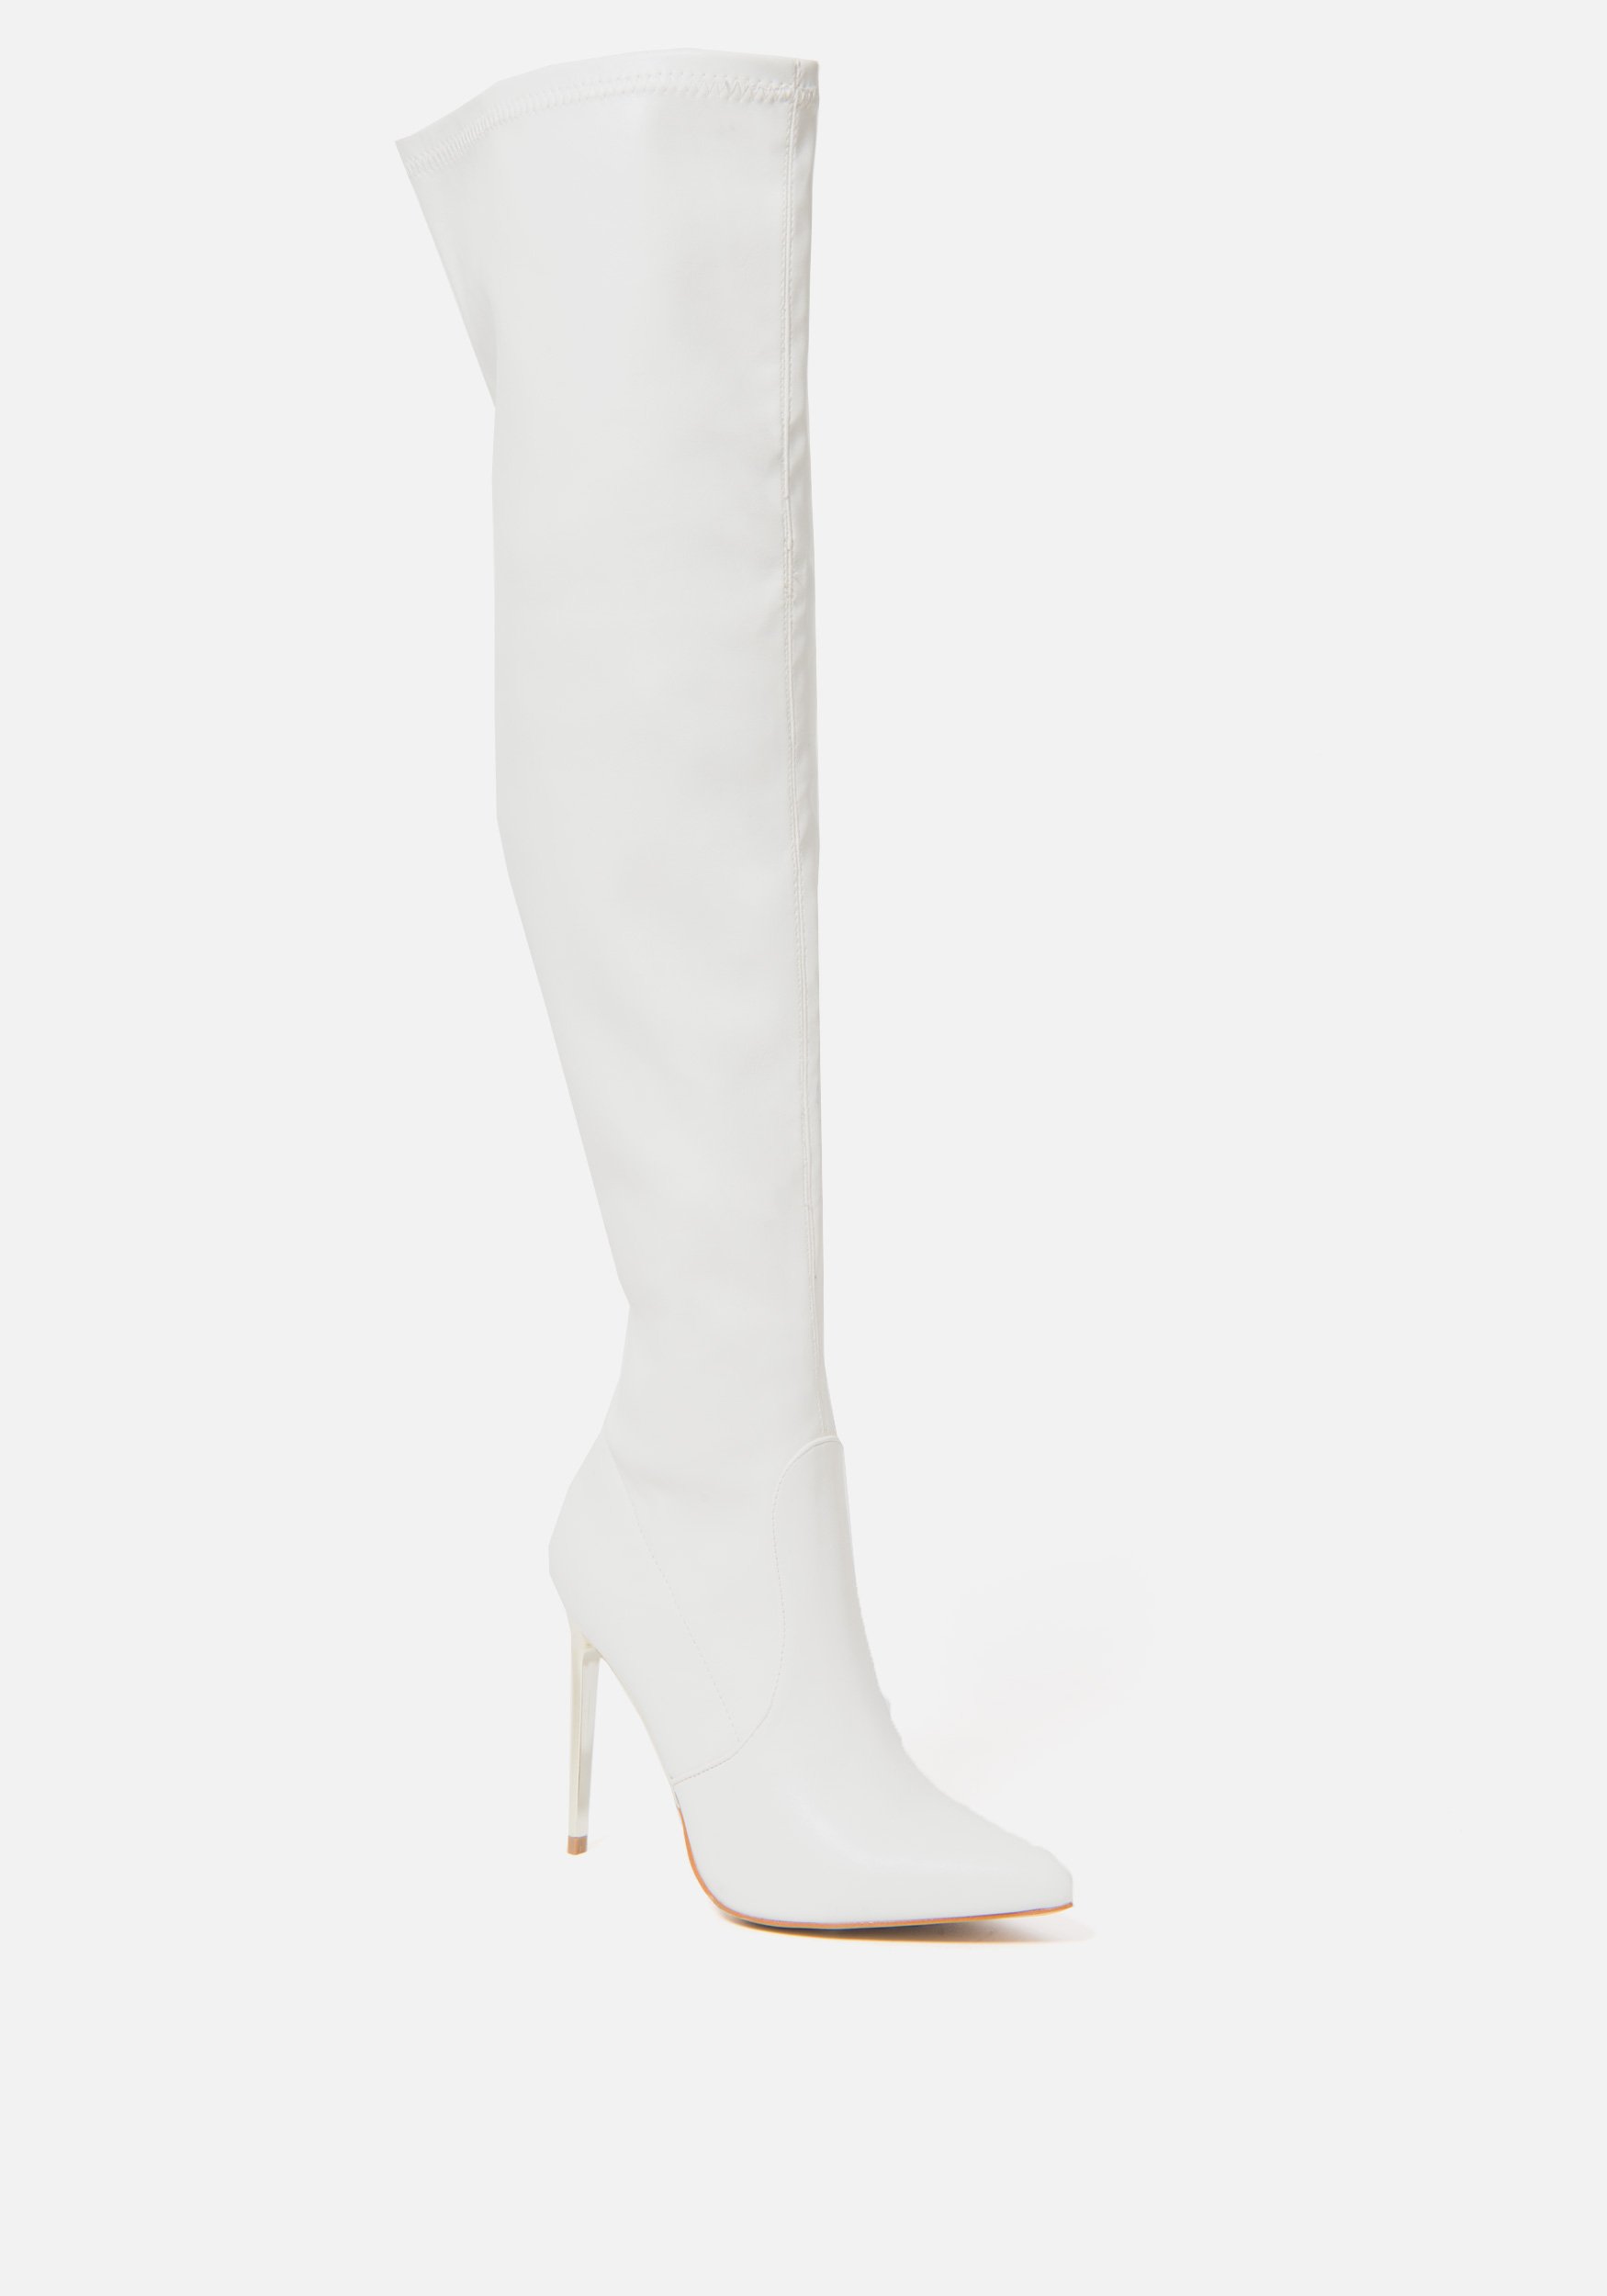 Bebe Women's Valirya Over the Knee Boots, Size 8.5 in WINTER WHITE Synthetic